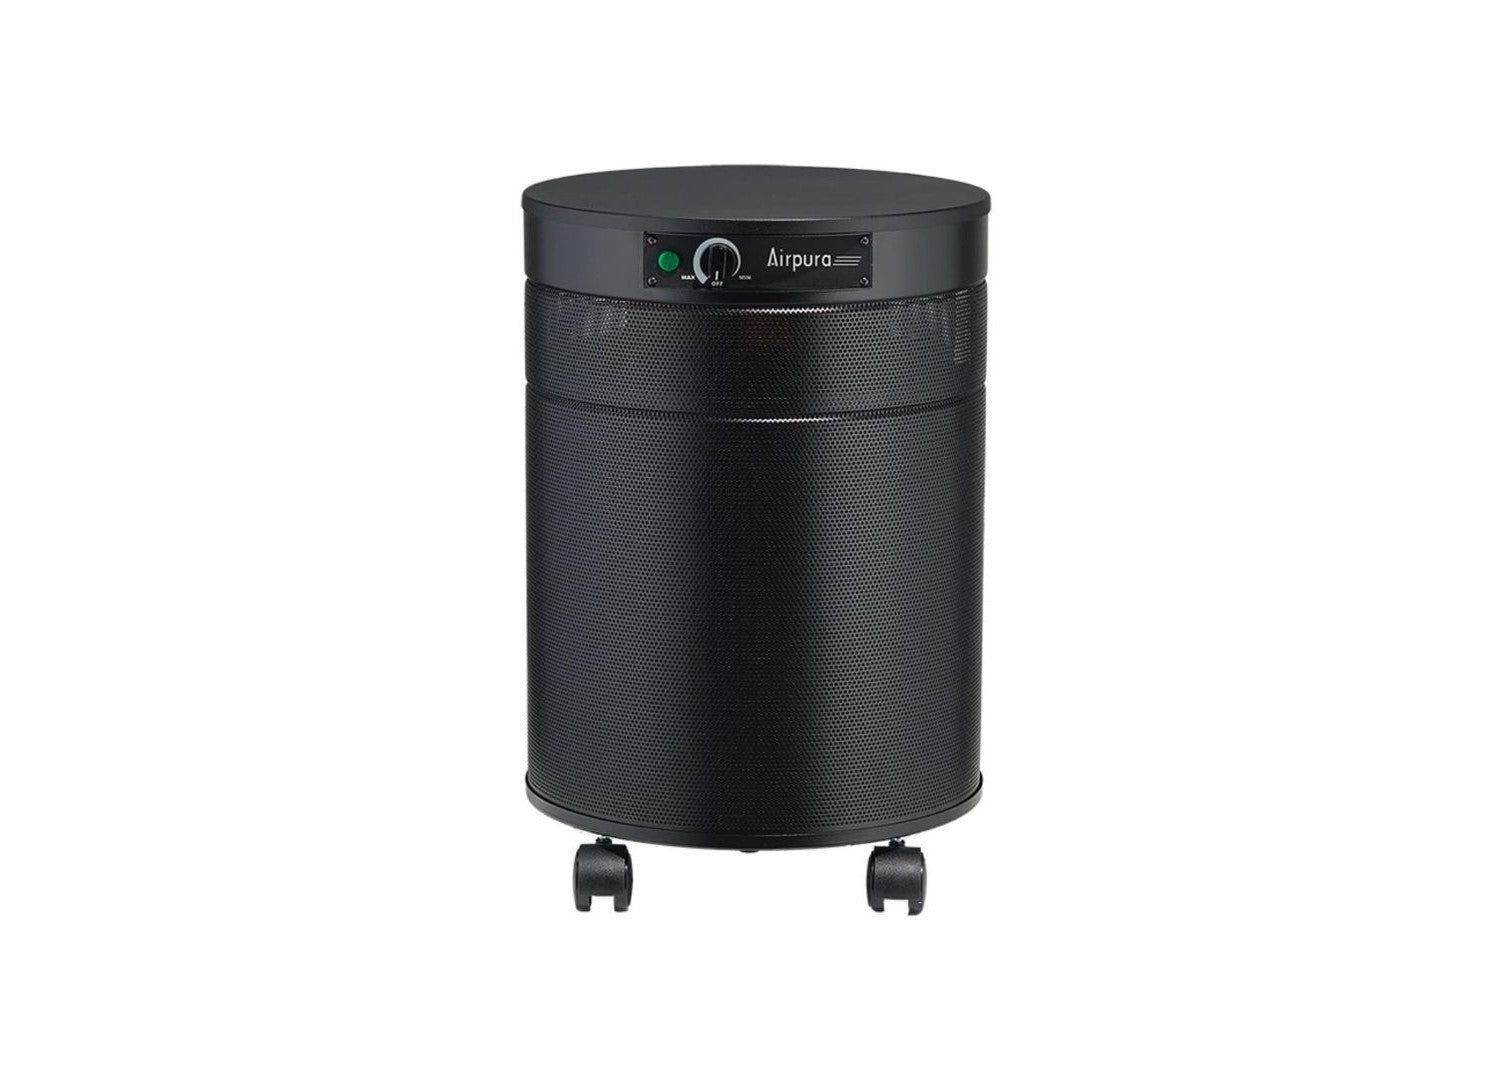 Airpura P600 Air Purifier for Germs, Mold & Chemicals